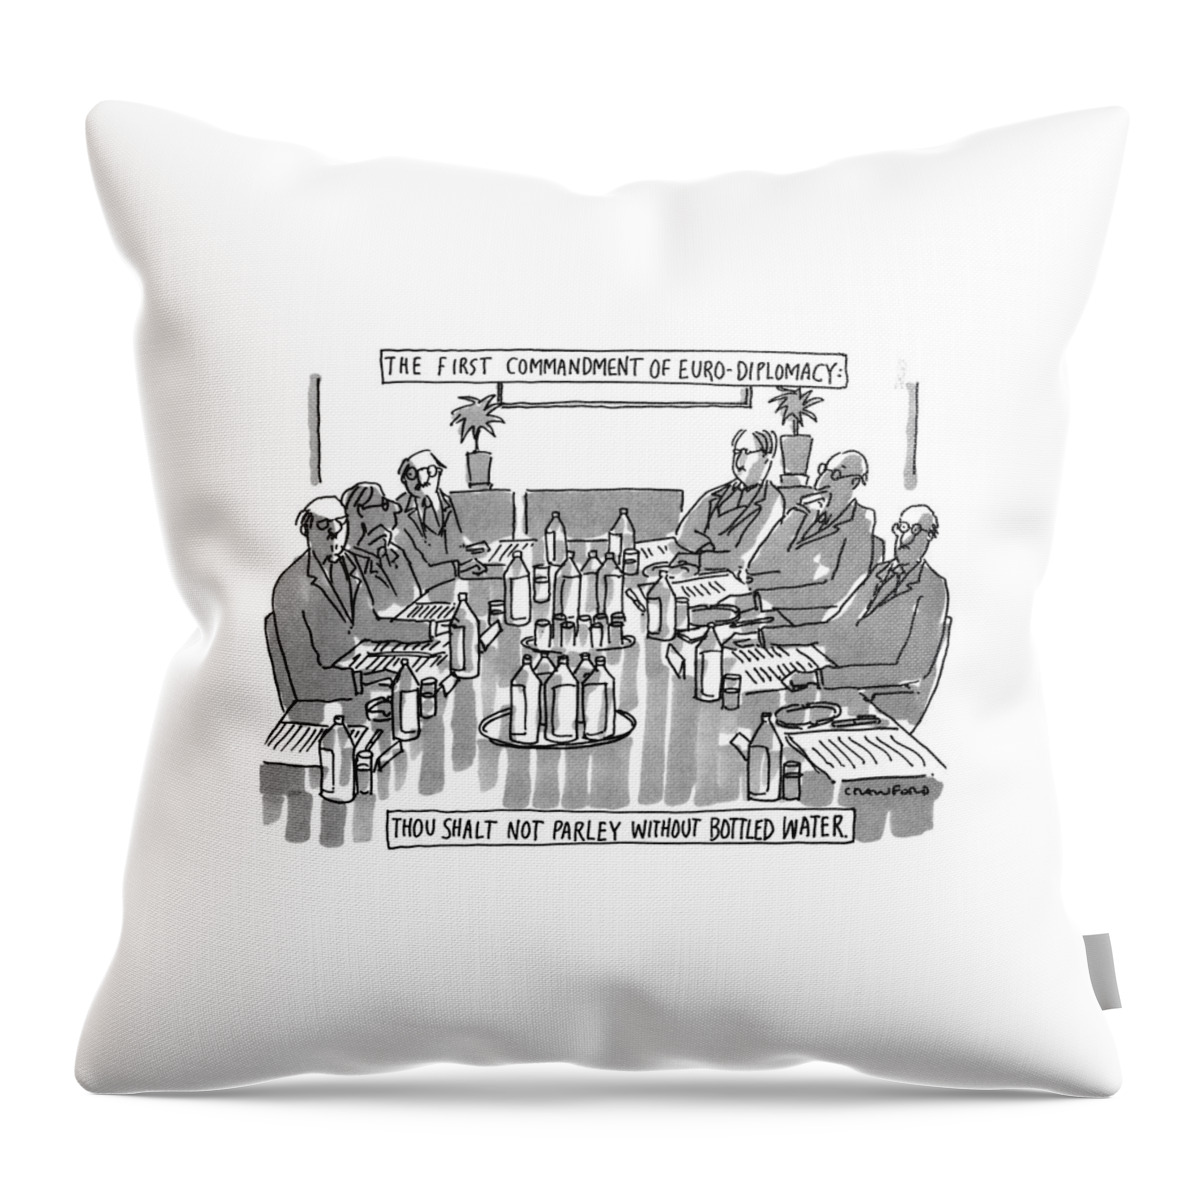 The First Commandment Of Euro-diplomacy:
Thou Throw Pillow